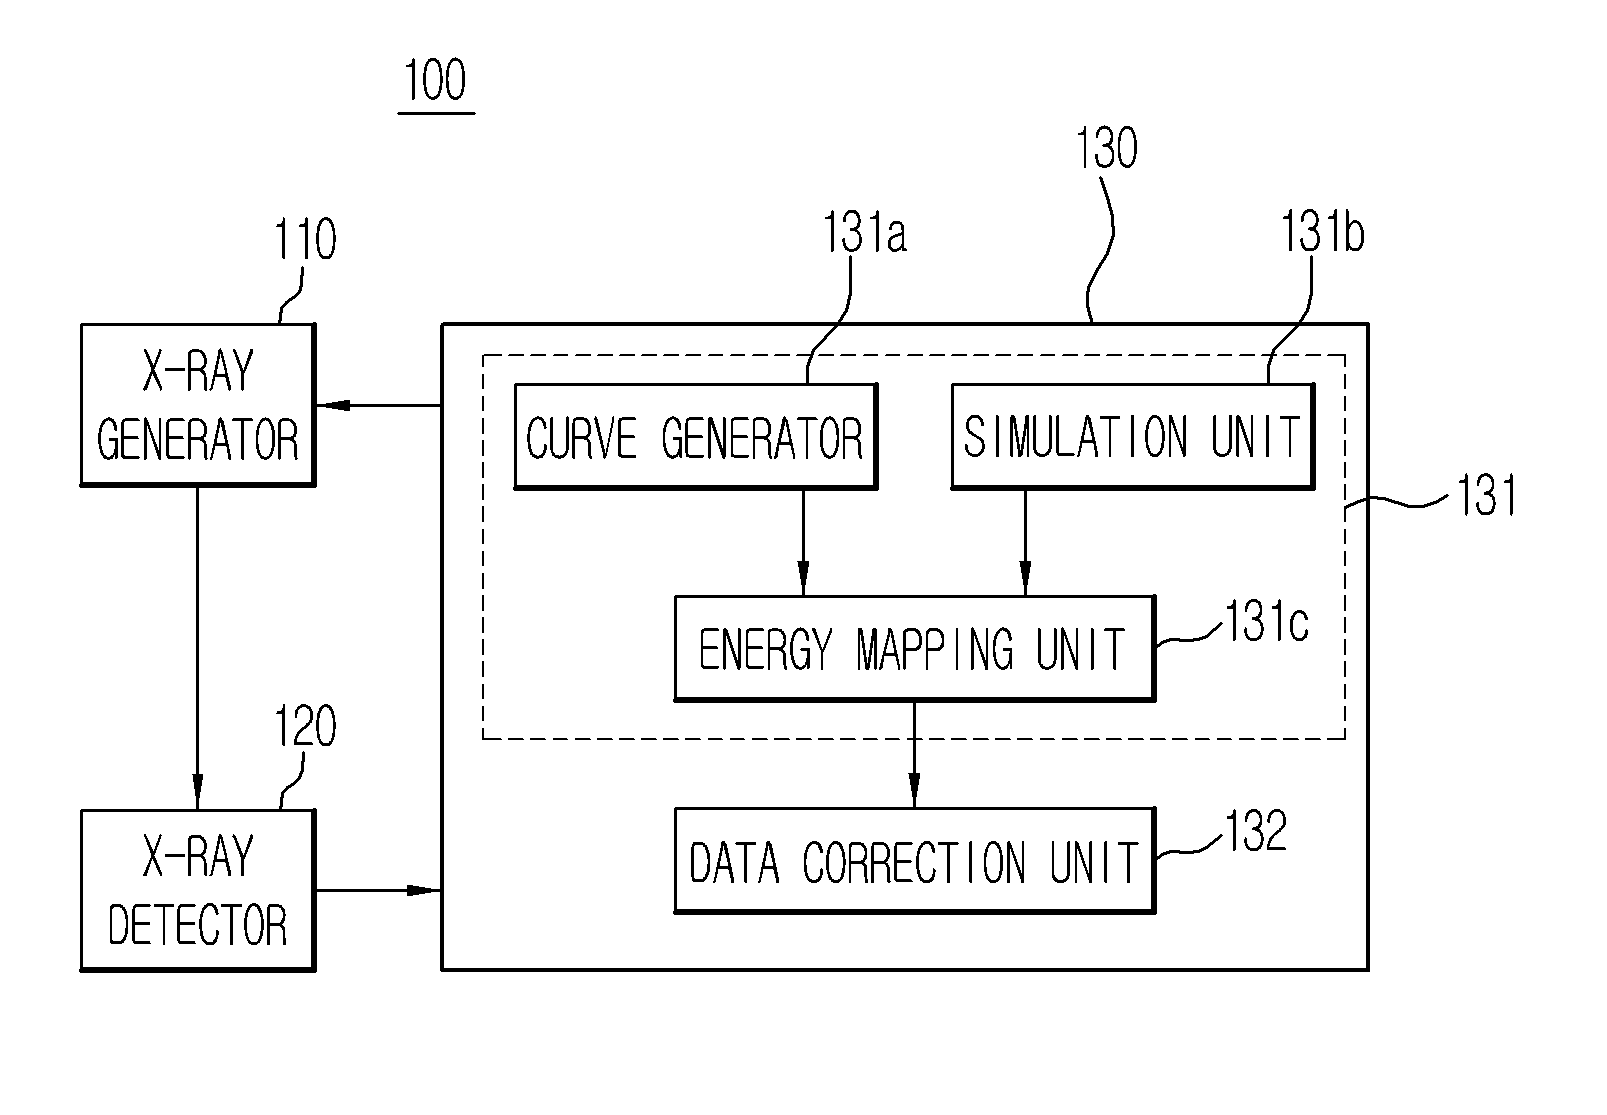 X-ray imaging apparatus and method of controlling the same